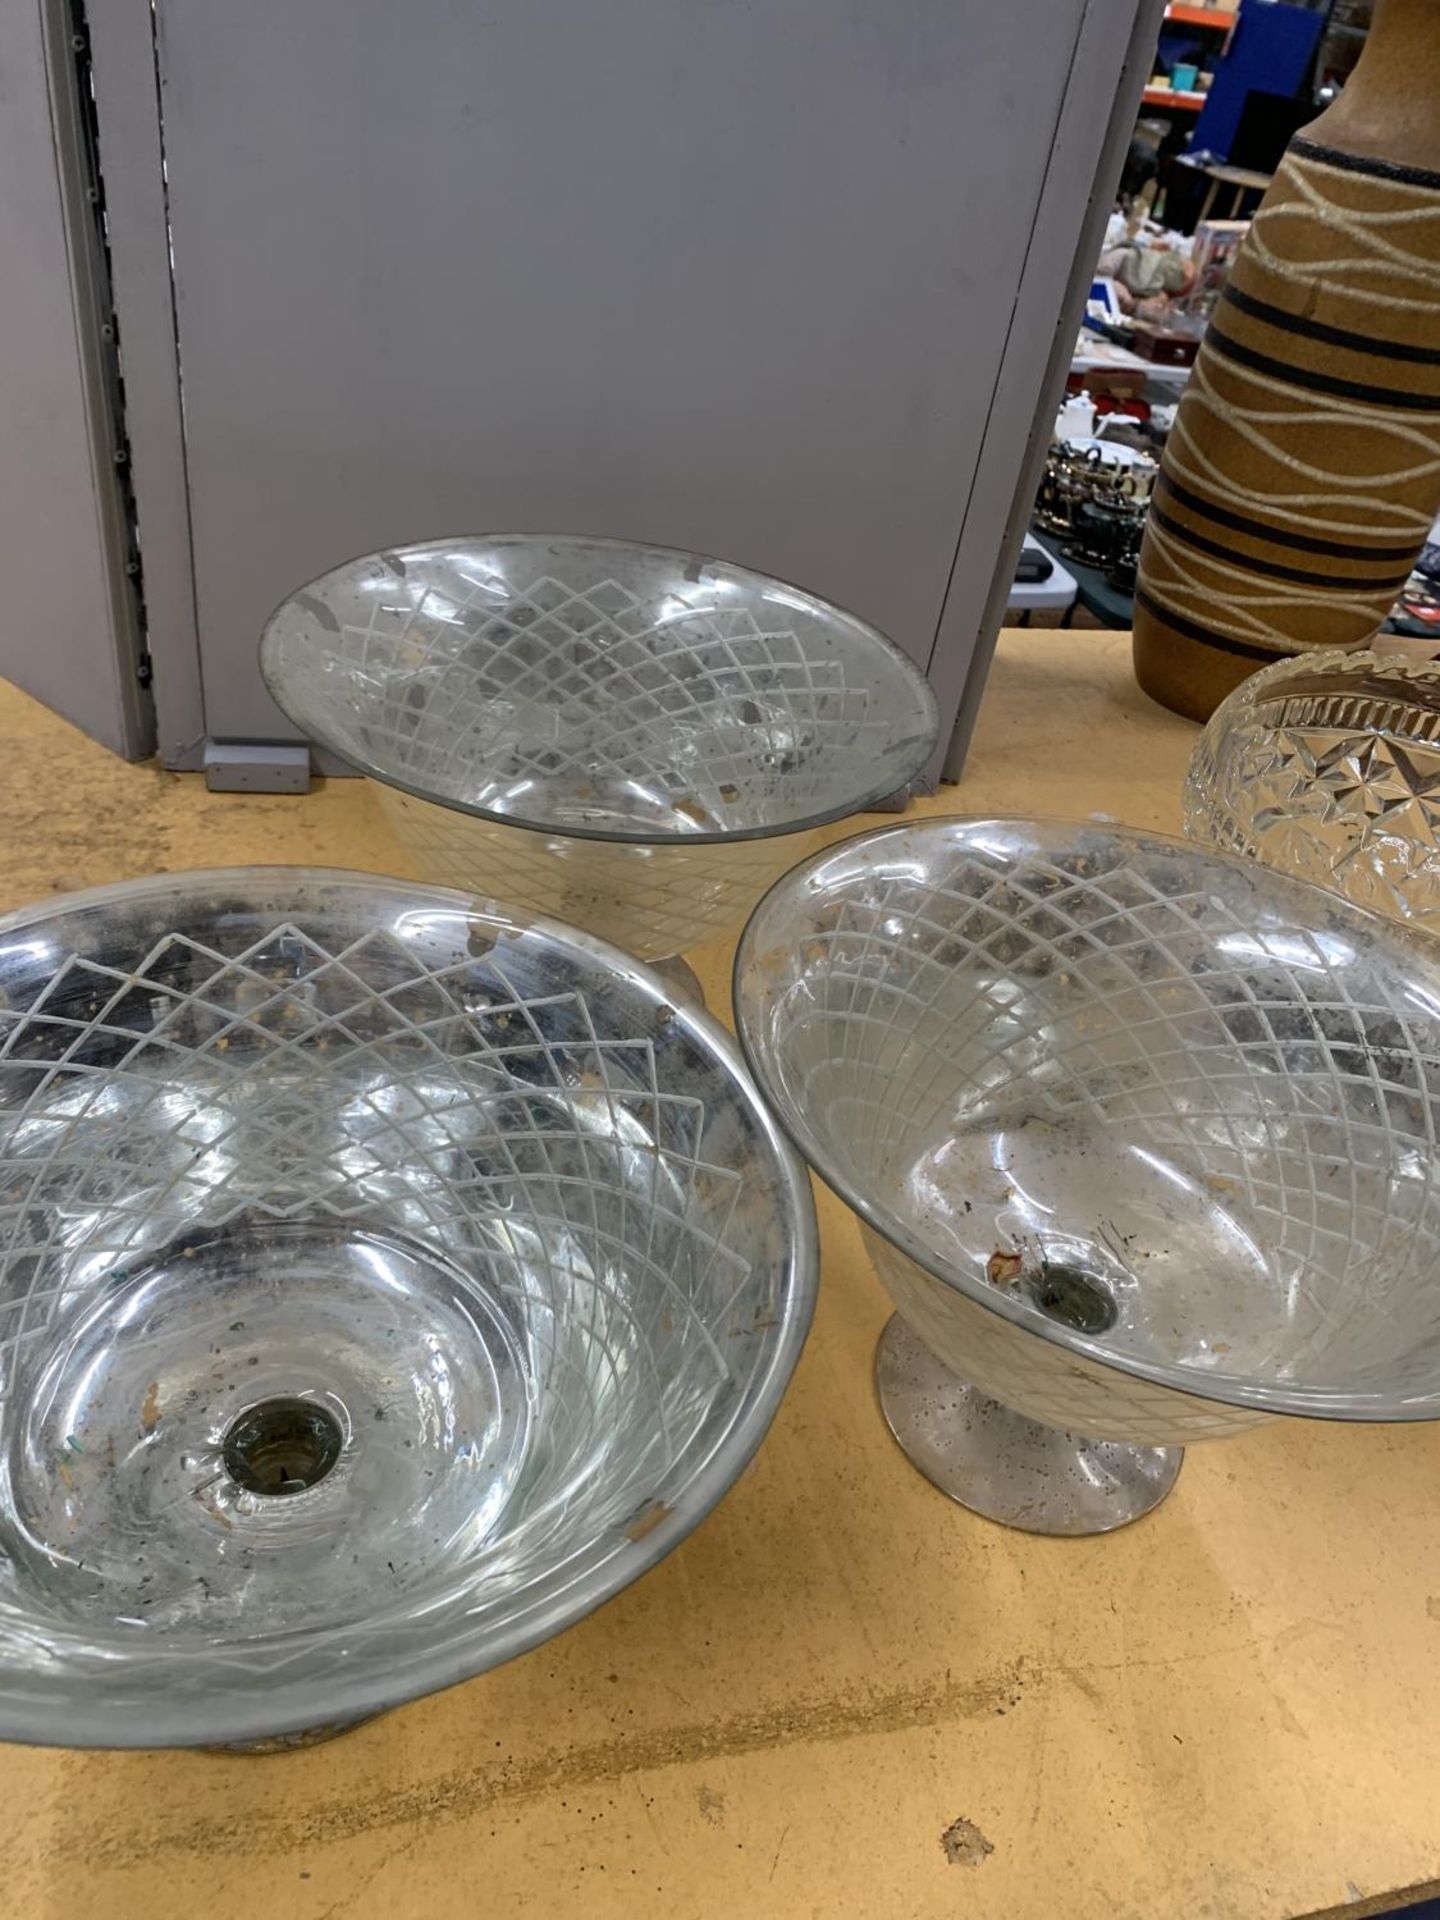 THREE LARGE GLASS FOOTED BOWLS - Image 3 of 3